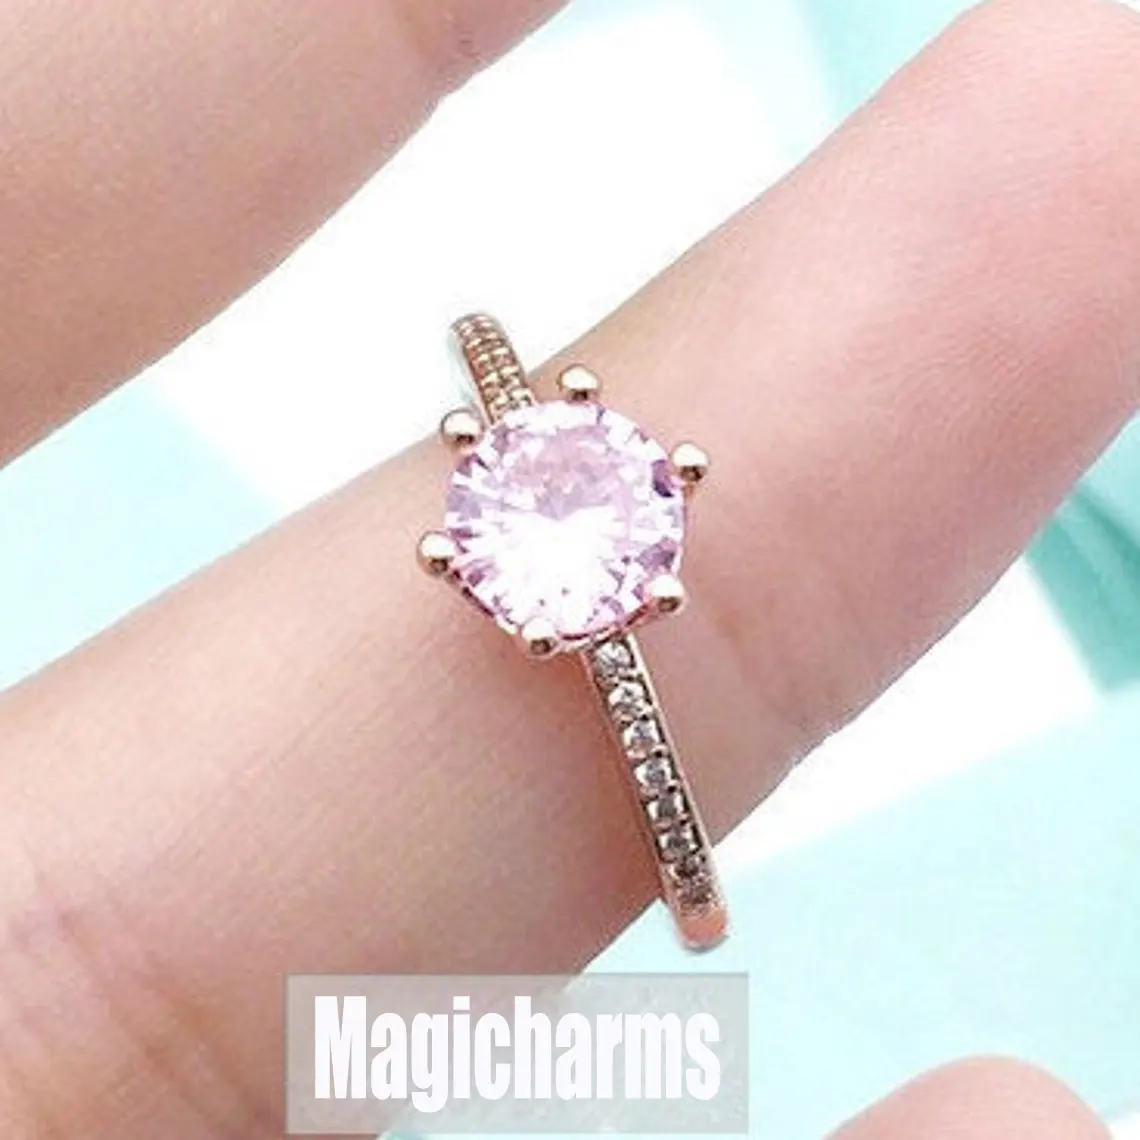 Pink Sparkling Crown Solitaire Ring